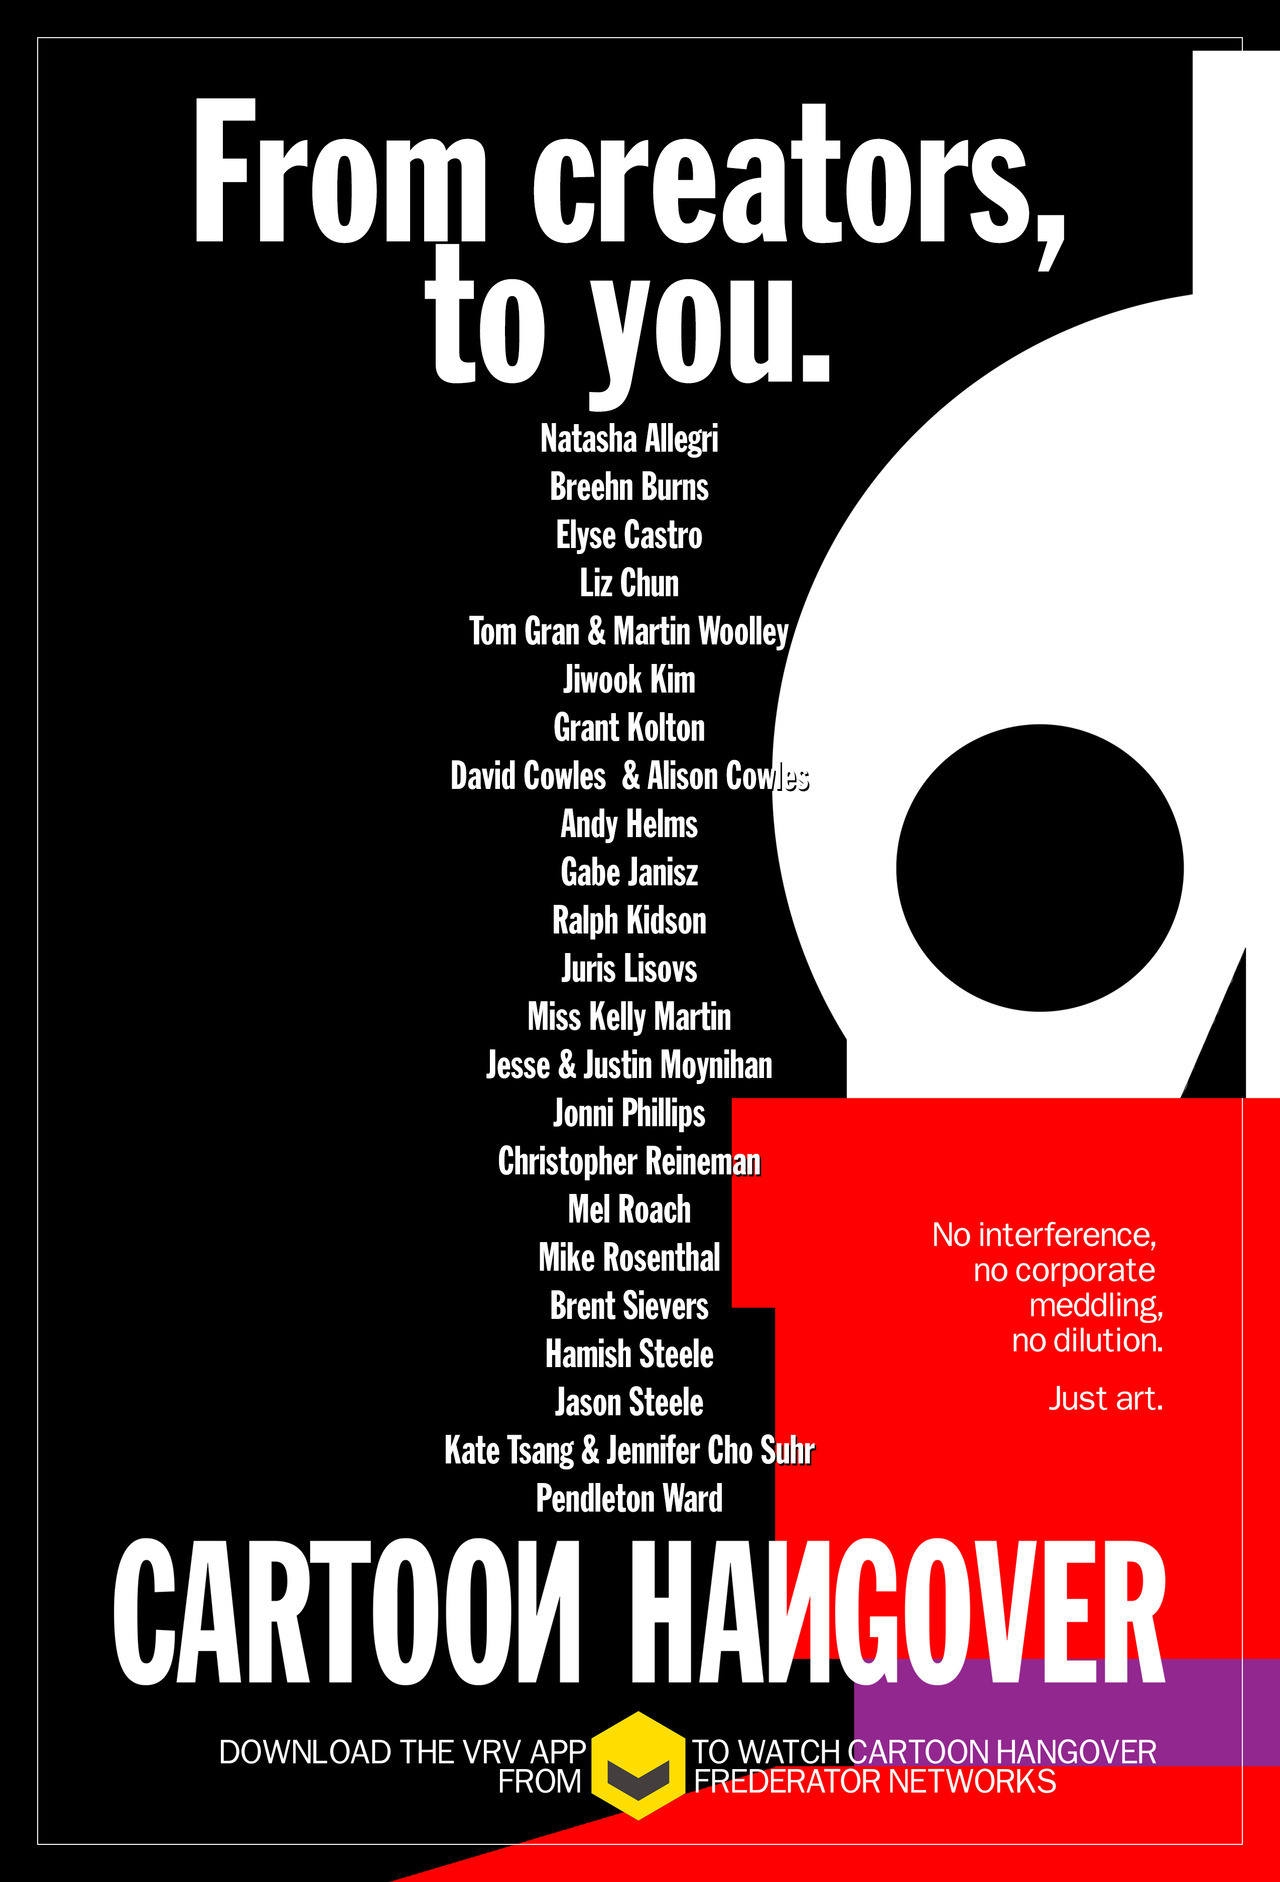 cartoonhangover: “Cartoon Hangover: From Creators to You. “No interference, no corporate meddling, no dilution.”…